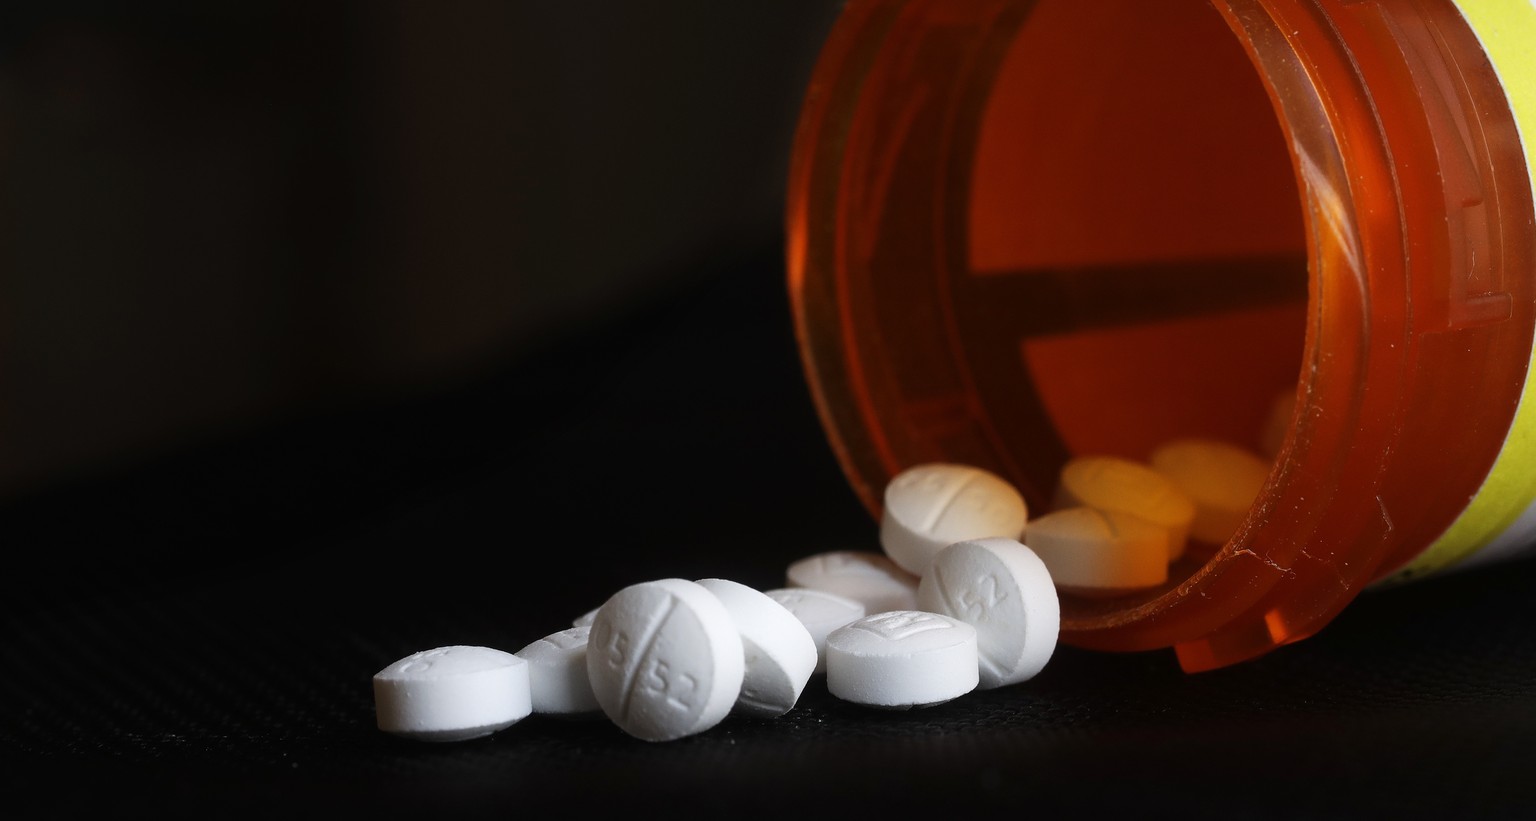 This Wednesday, Aug. 29, 2018 photo shows an arrangement of Oxycodone pills in New York. A study in Tennessee released on Thursday, Aug 30, 2018, found learning disabilities and other special educatio ...